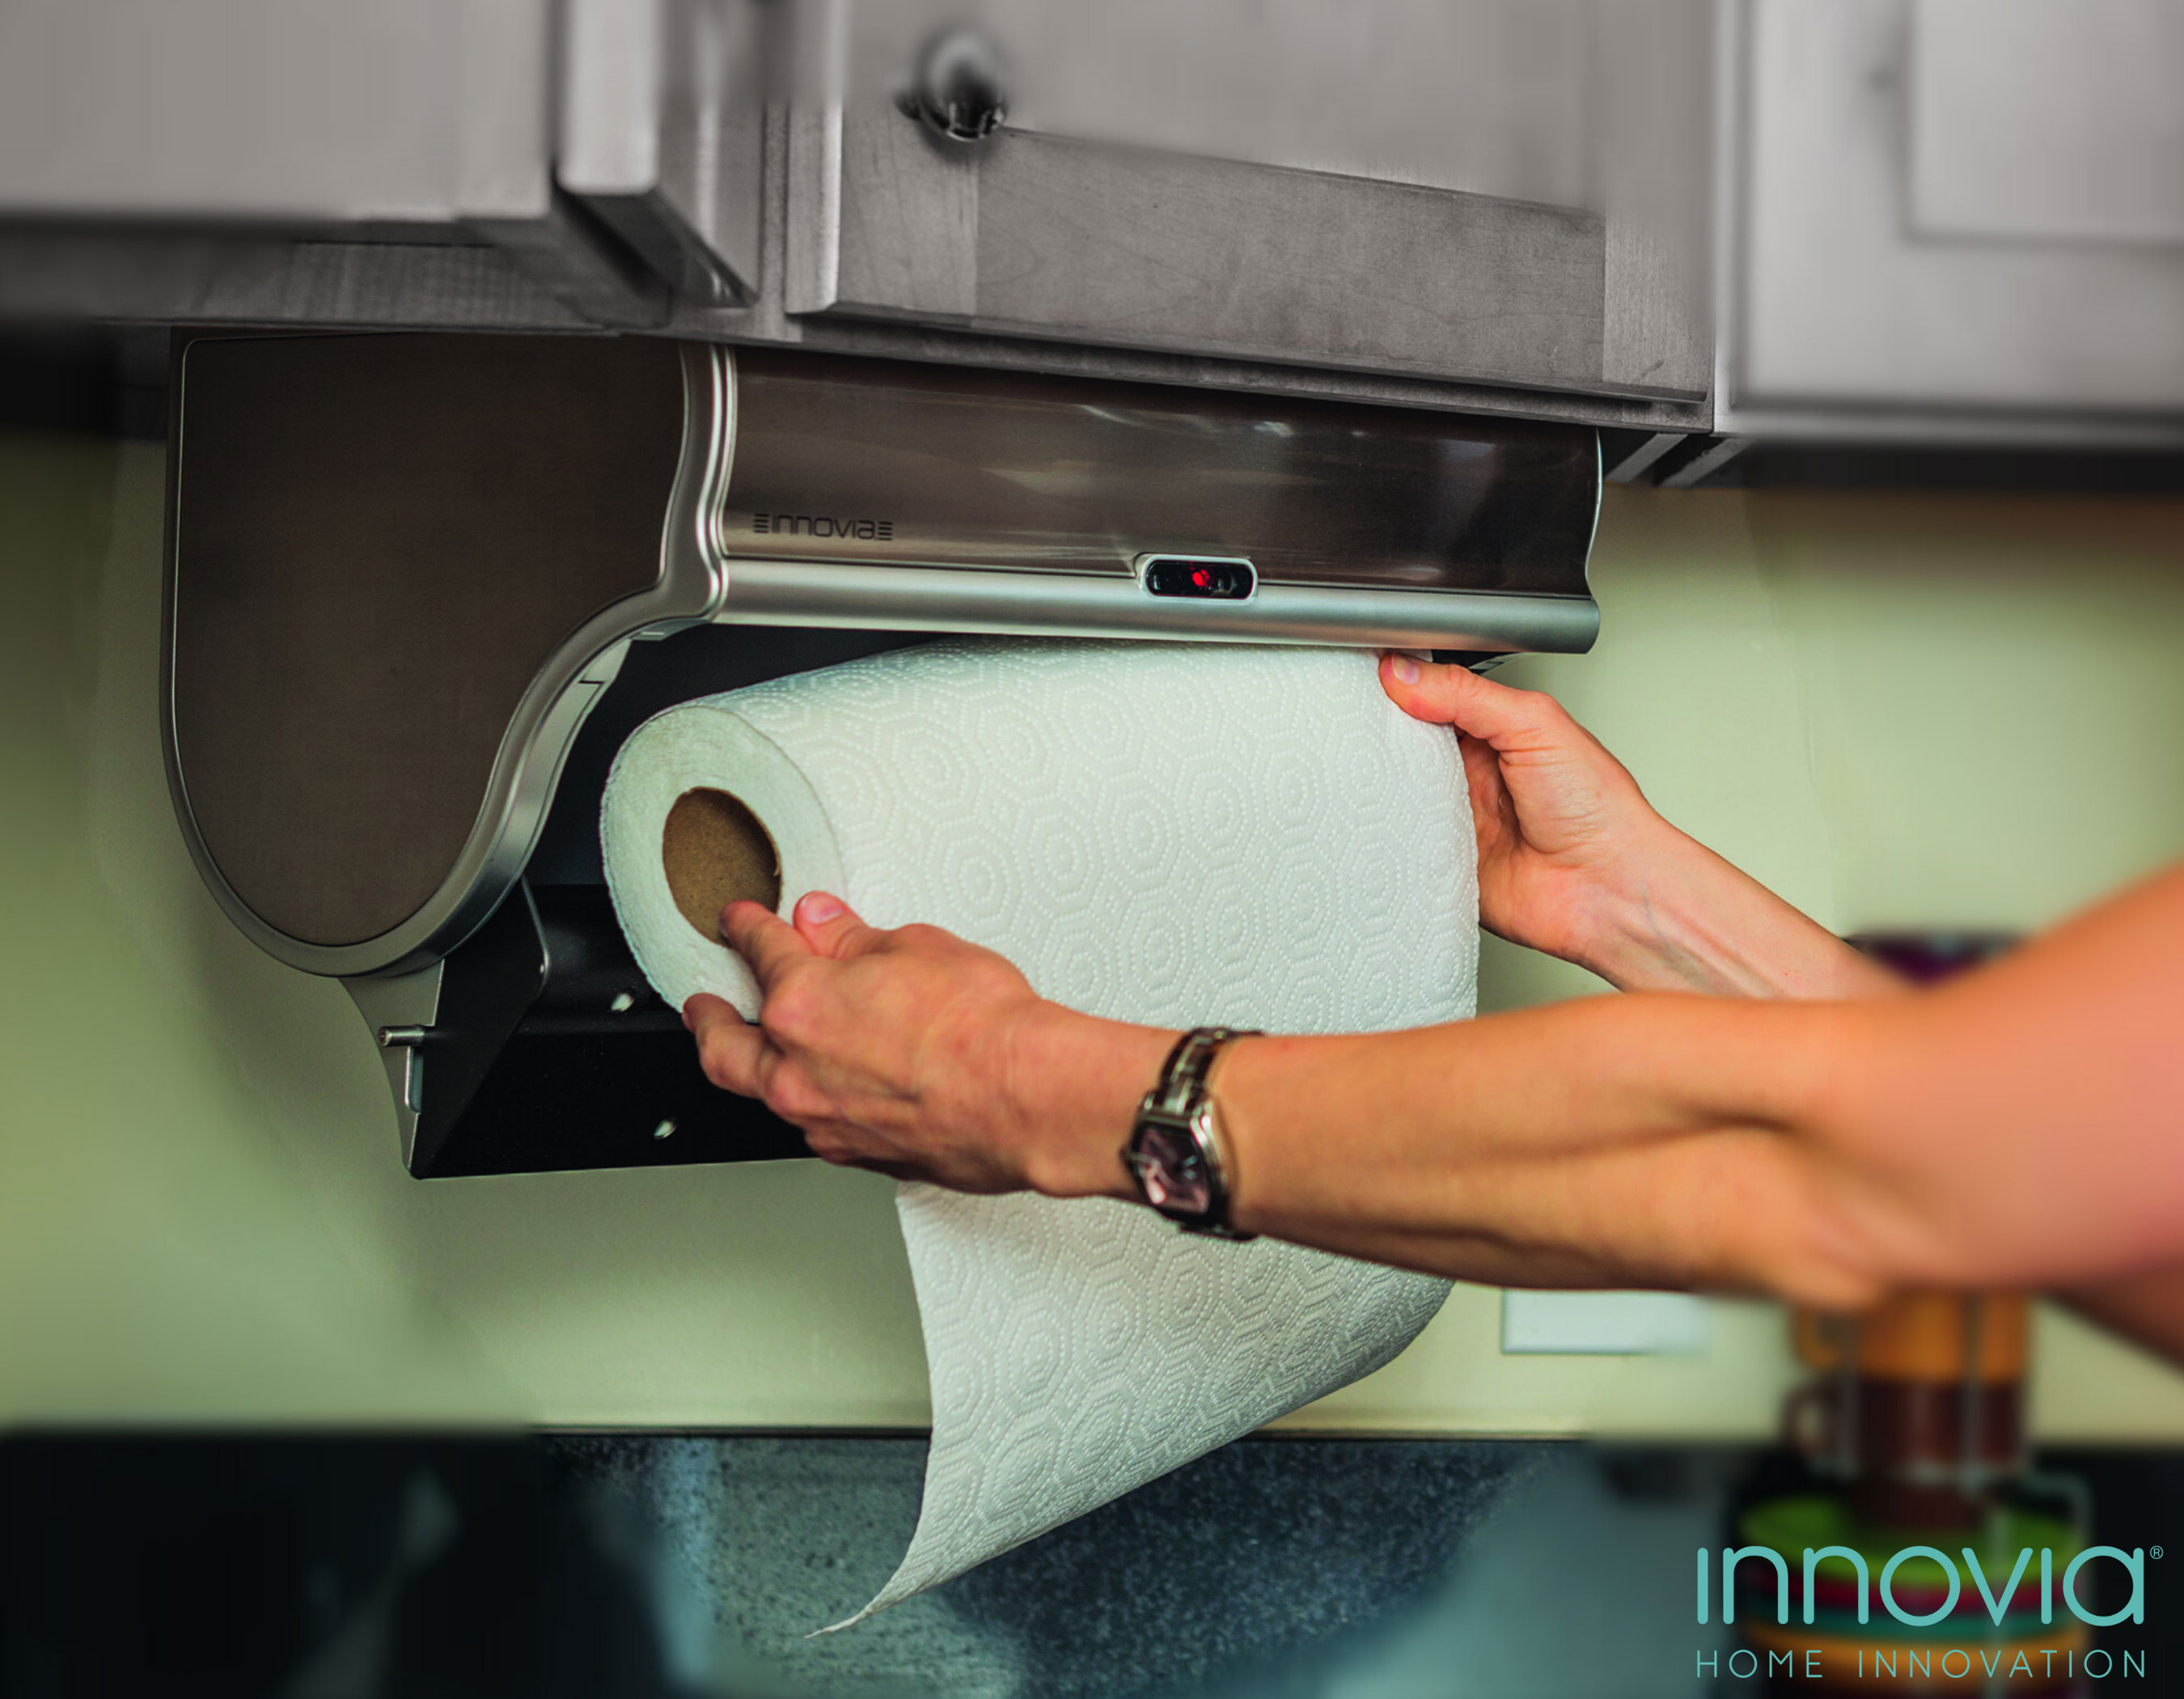 Introducing the Holiday's Hottest Kitchen Gadget: the Innovia